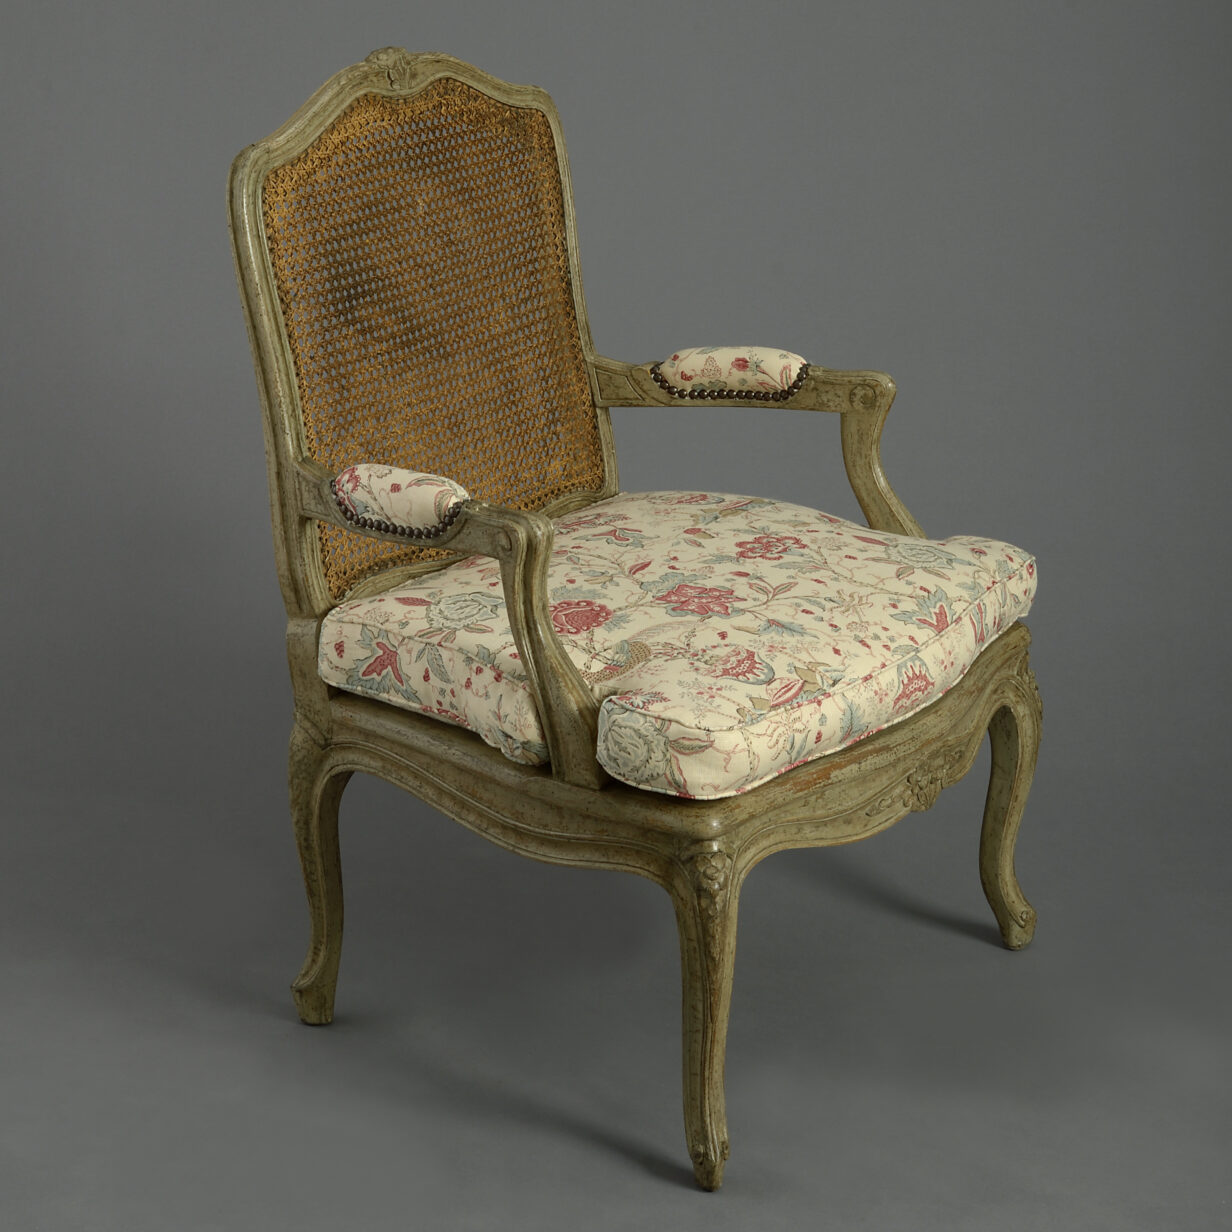 Pair of 18th century louis xv period painted rococo armchairs